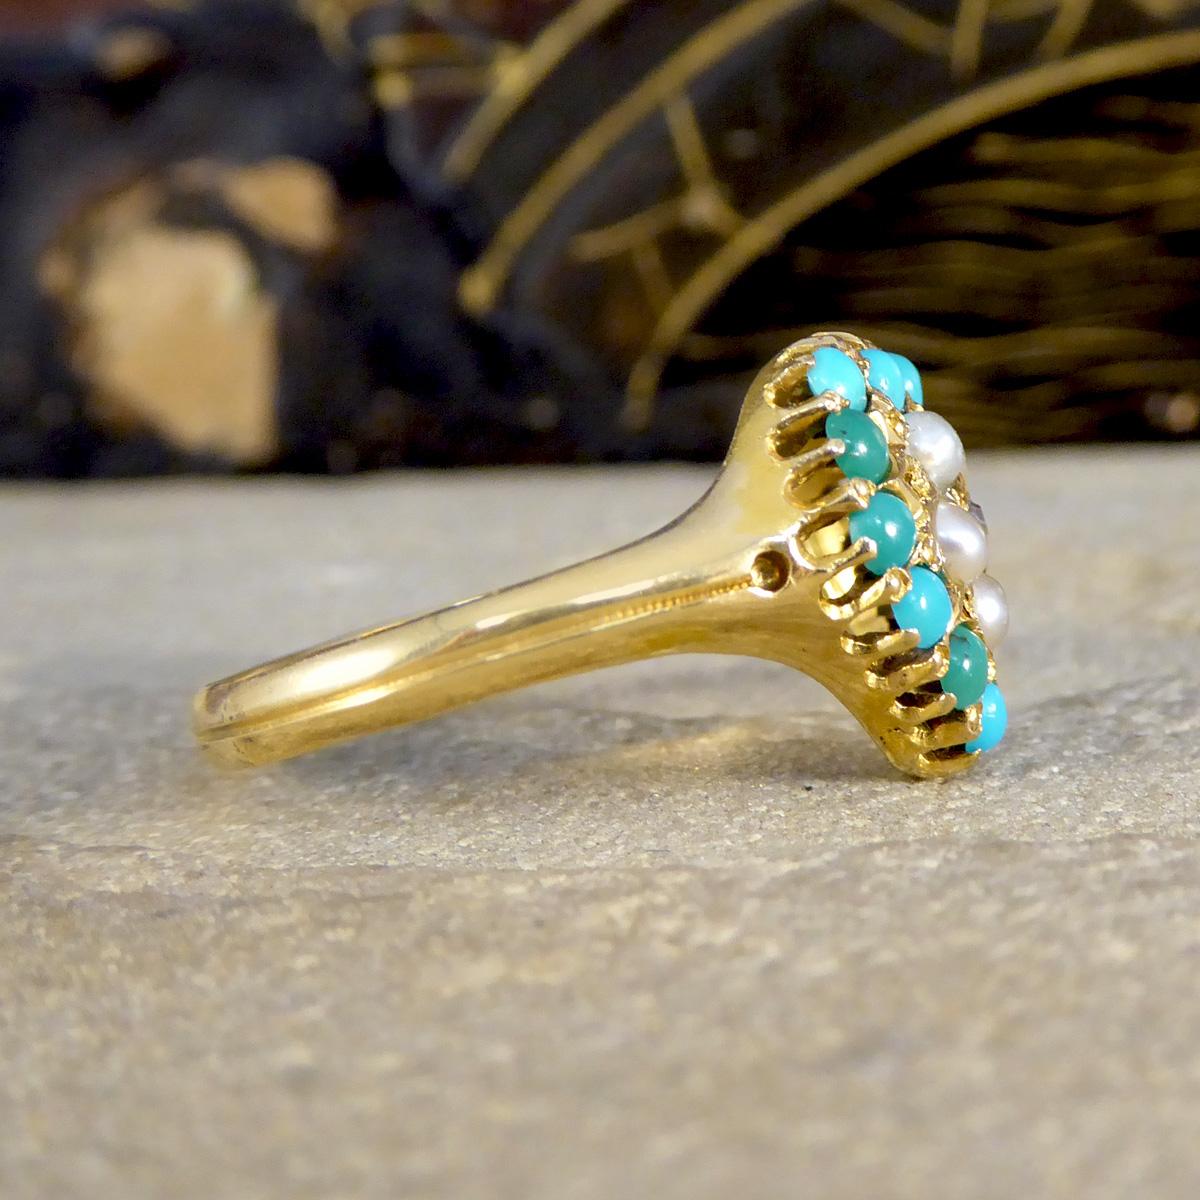 Old European Cut Victorian Heart Shaped Turquoise Seed Pearl and Diamond Cluster Ring 18ct Gold For Sale